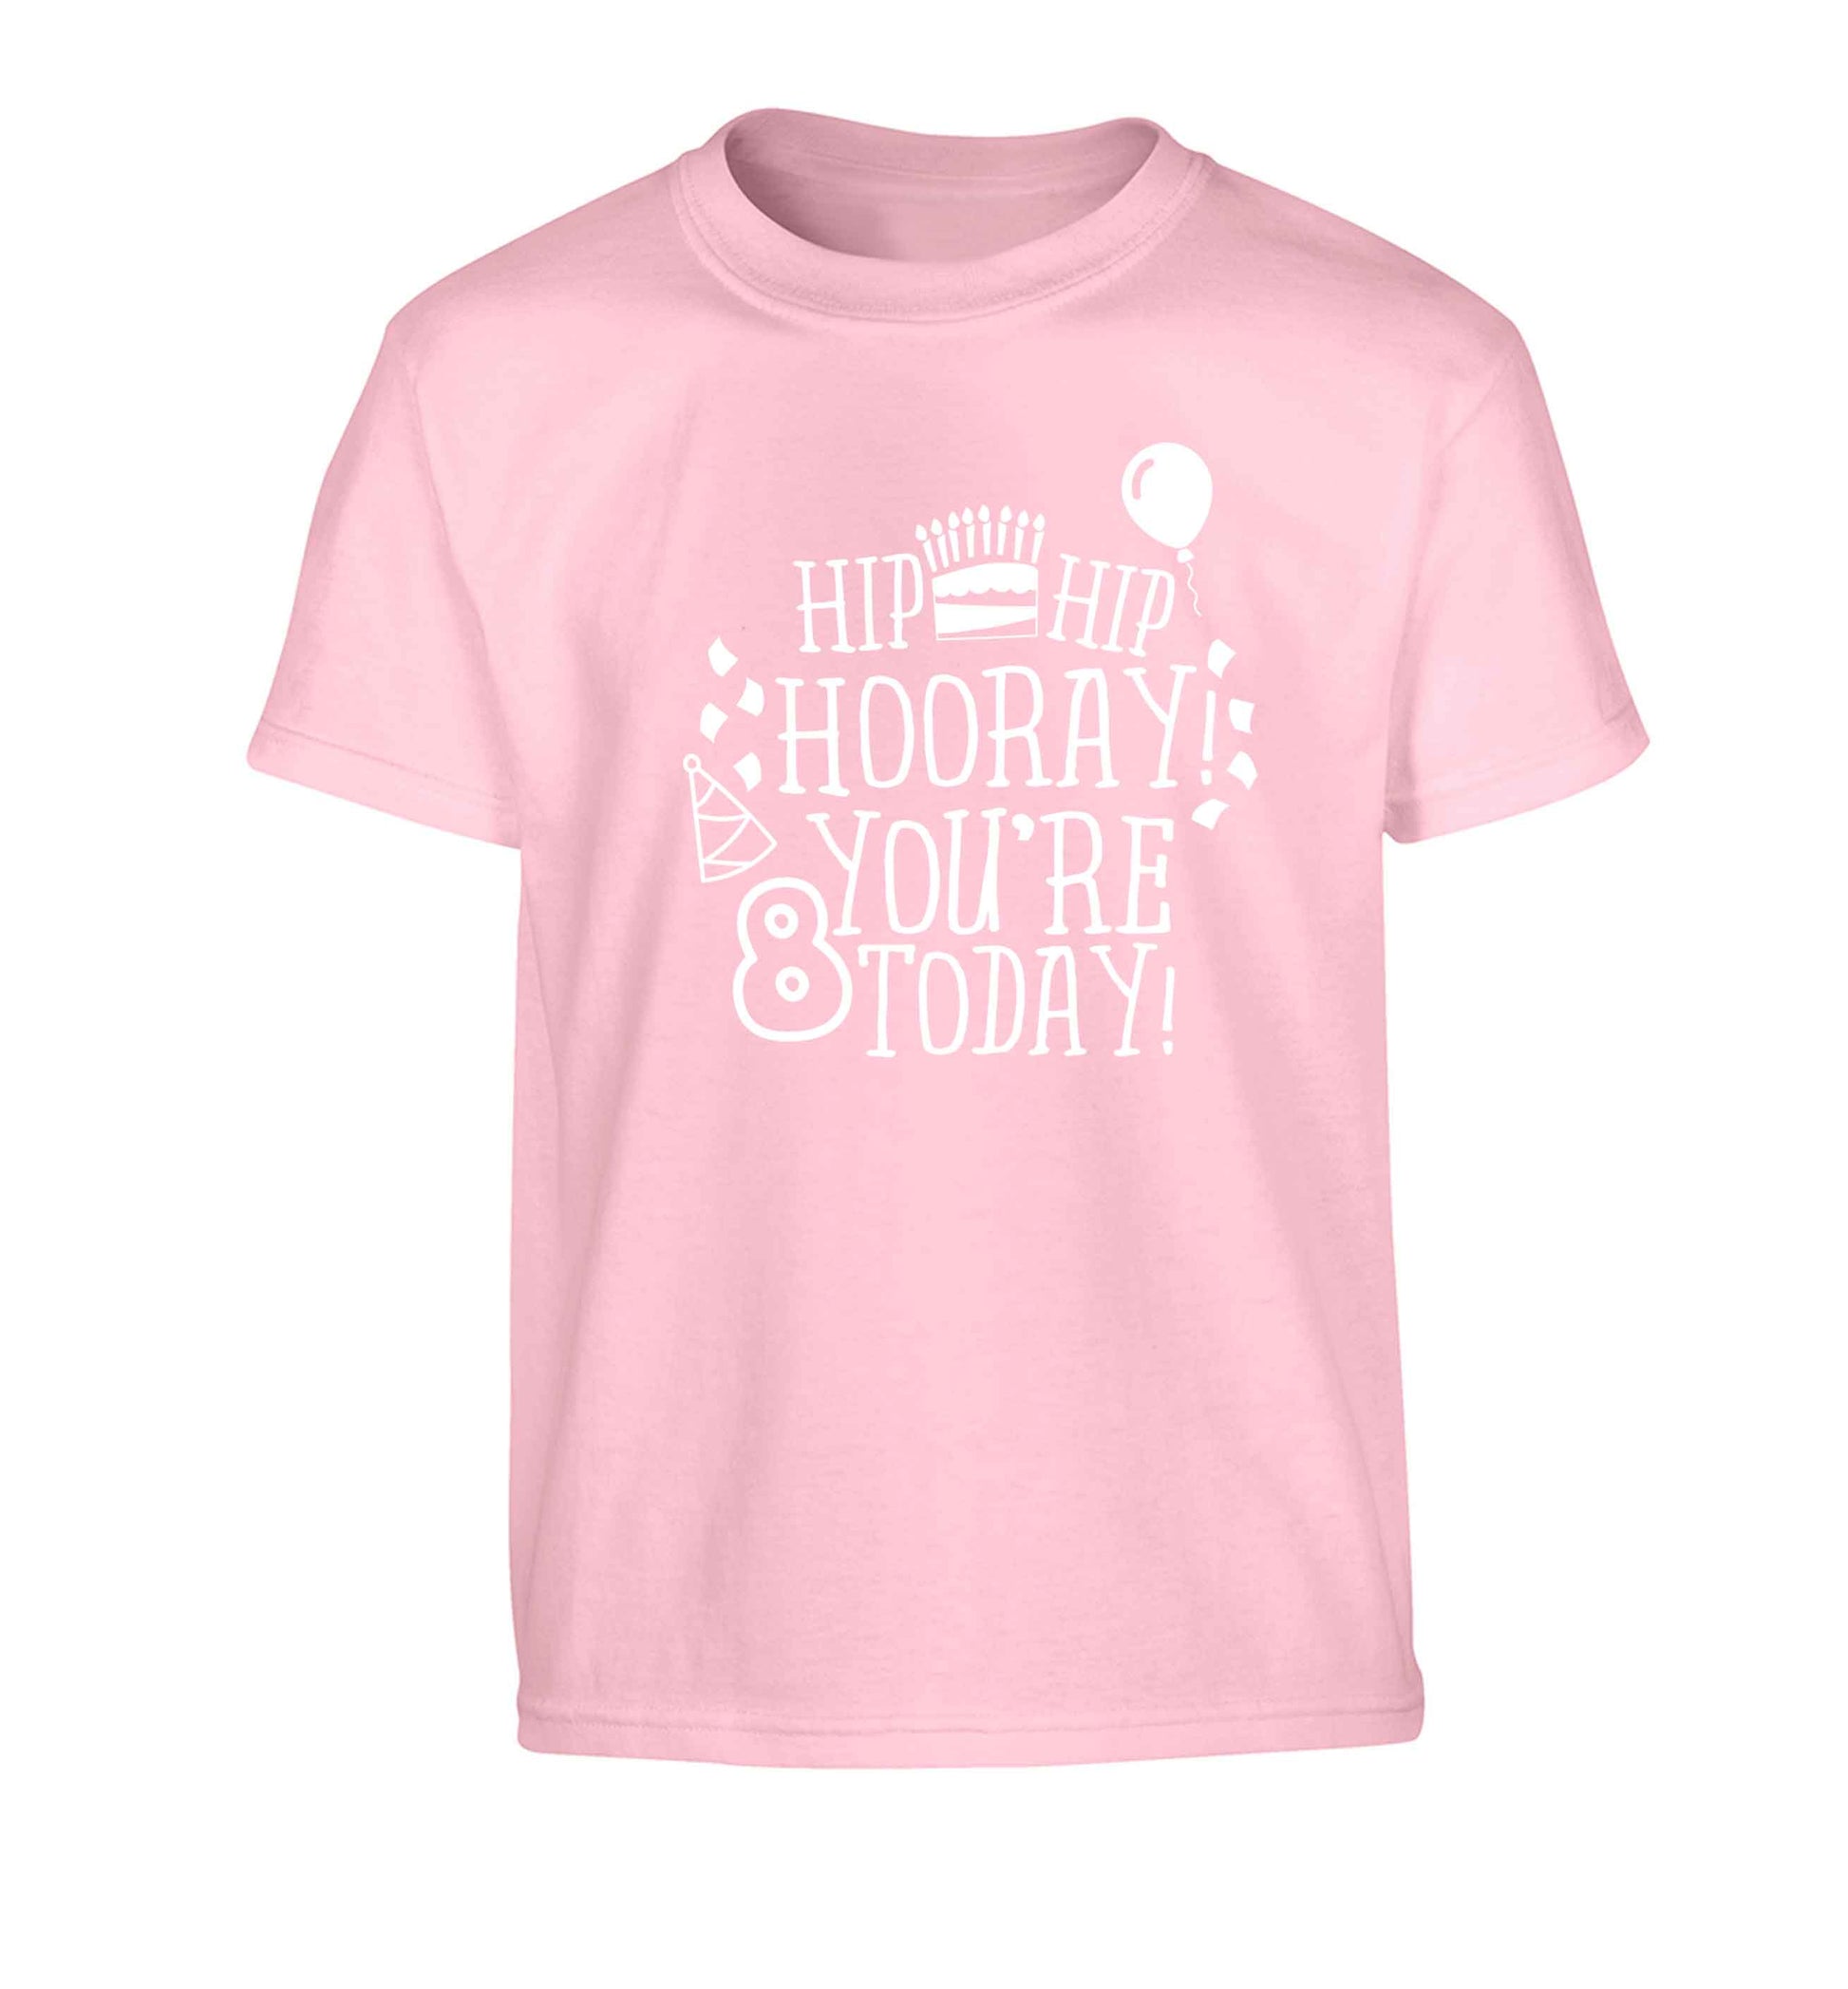 Hip hip hooray you're 8 today! Children's light pink Tshirt 12-13 Years